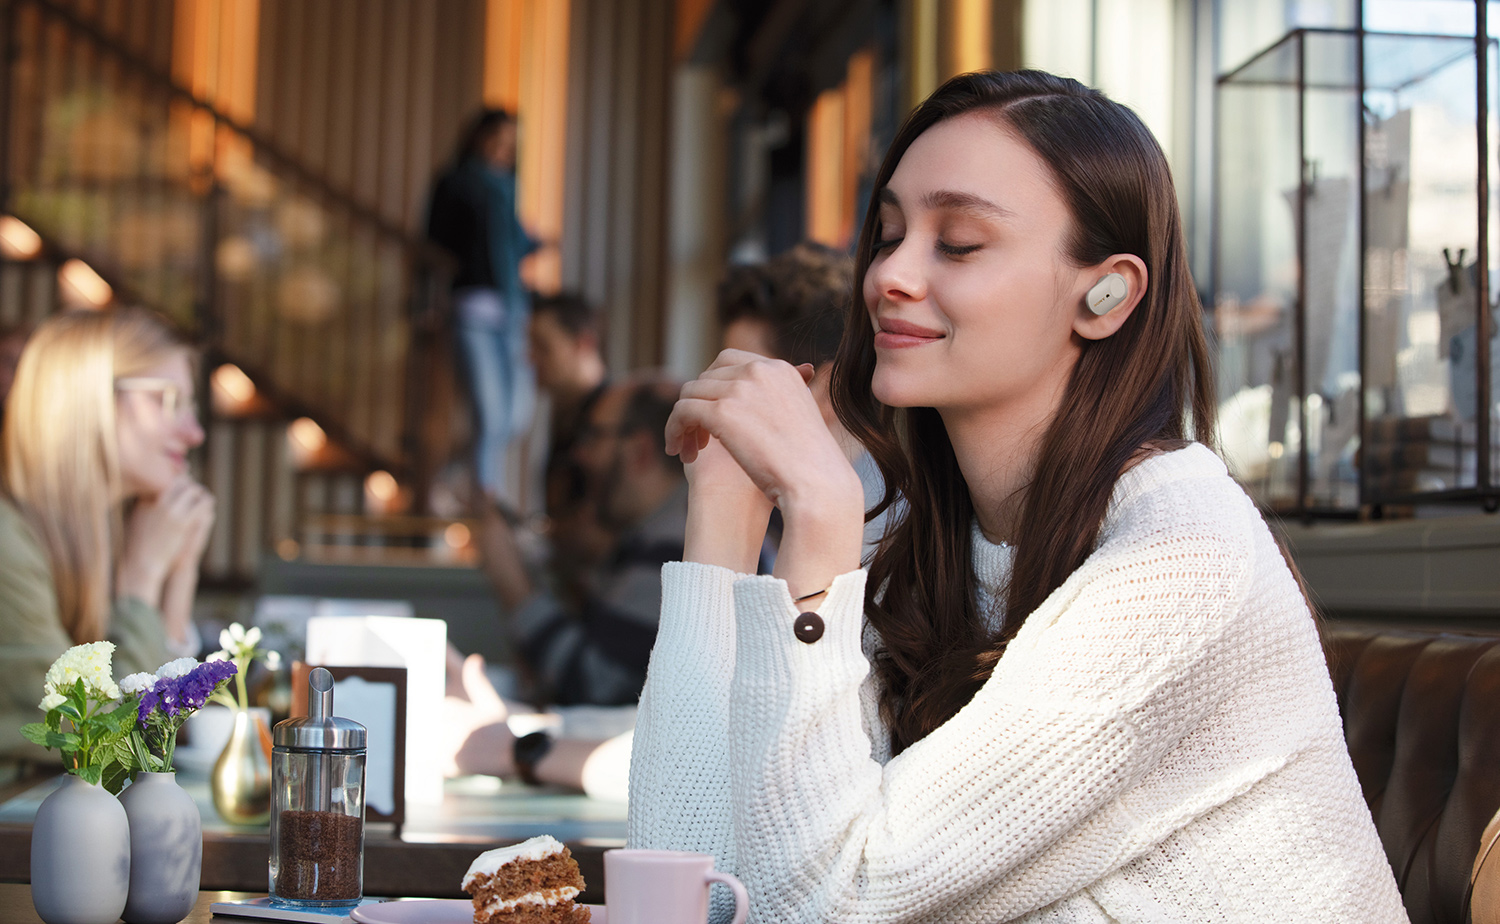 image of woman enjoying silence due to Truly Wireless headphones